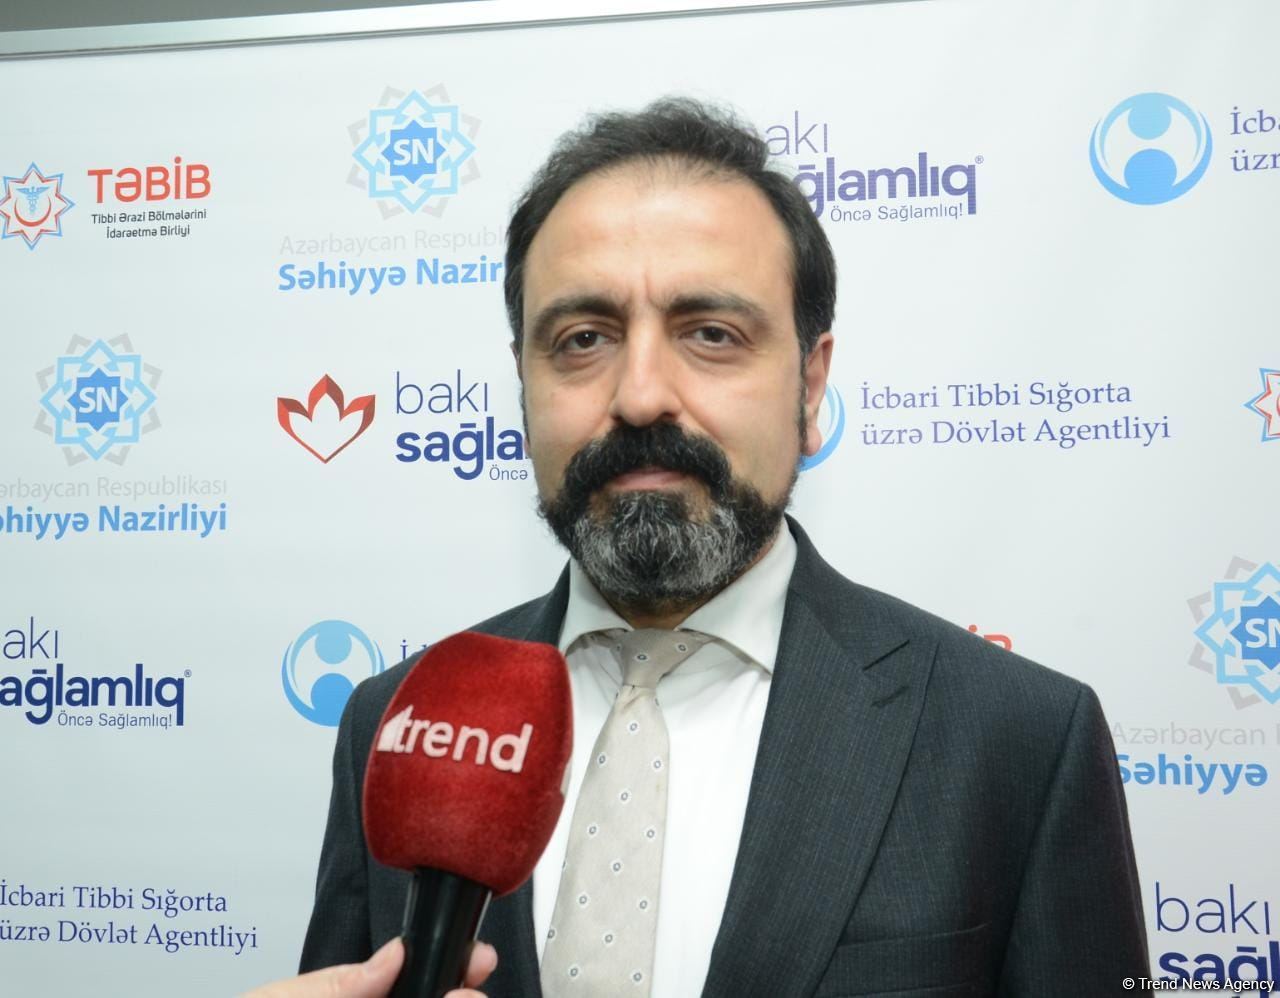 Interest of young people in technology once again witnessed at Teknofest in Azerbaijan - Turkish official